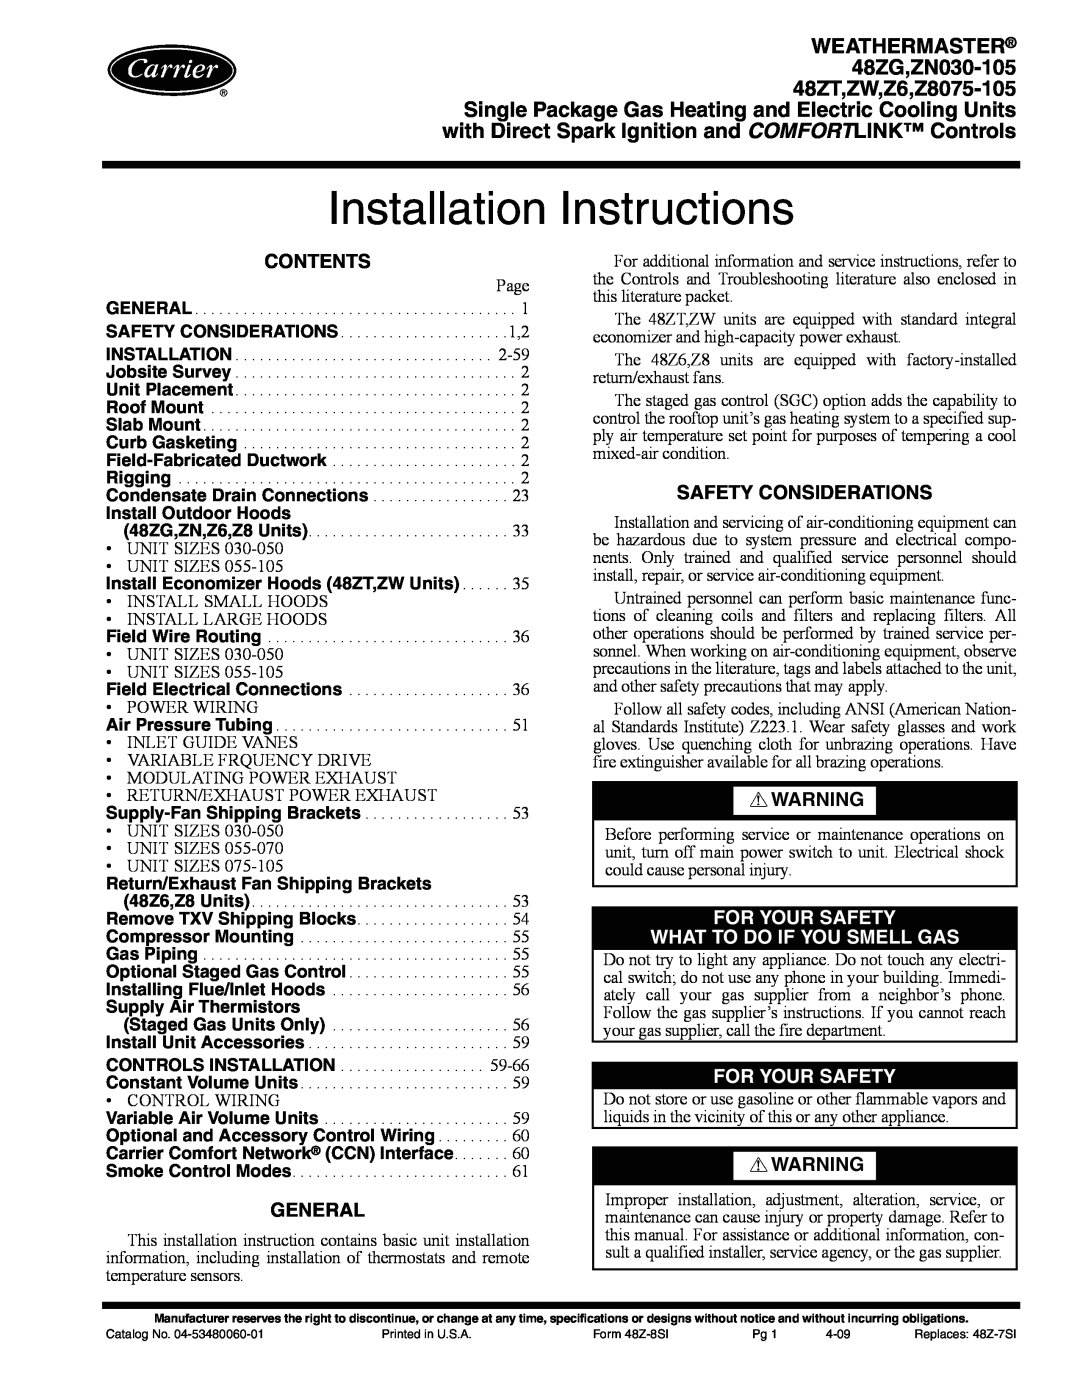 Carrier ZW, ZN030-105, Z6, 48ZT, Z8075-105, 48ZG specifications User’s Information Manual, with COMFORTLINK Controls 